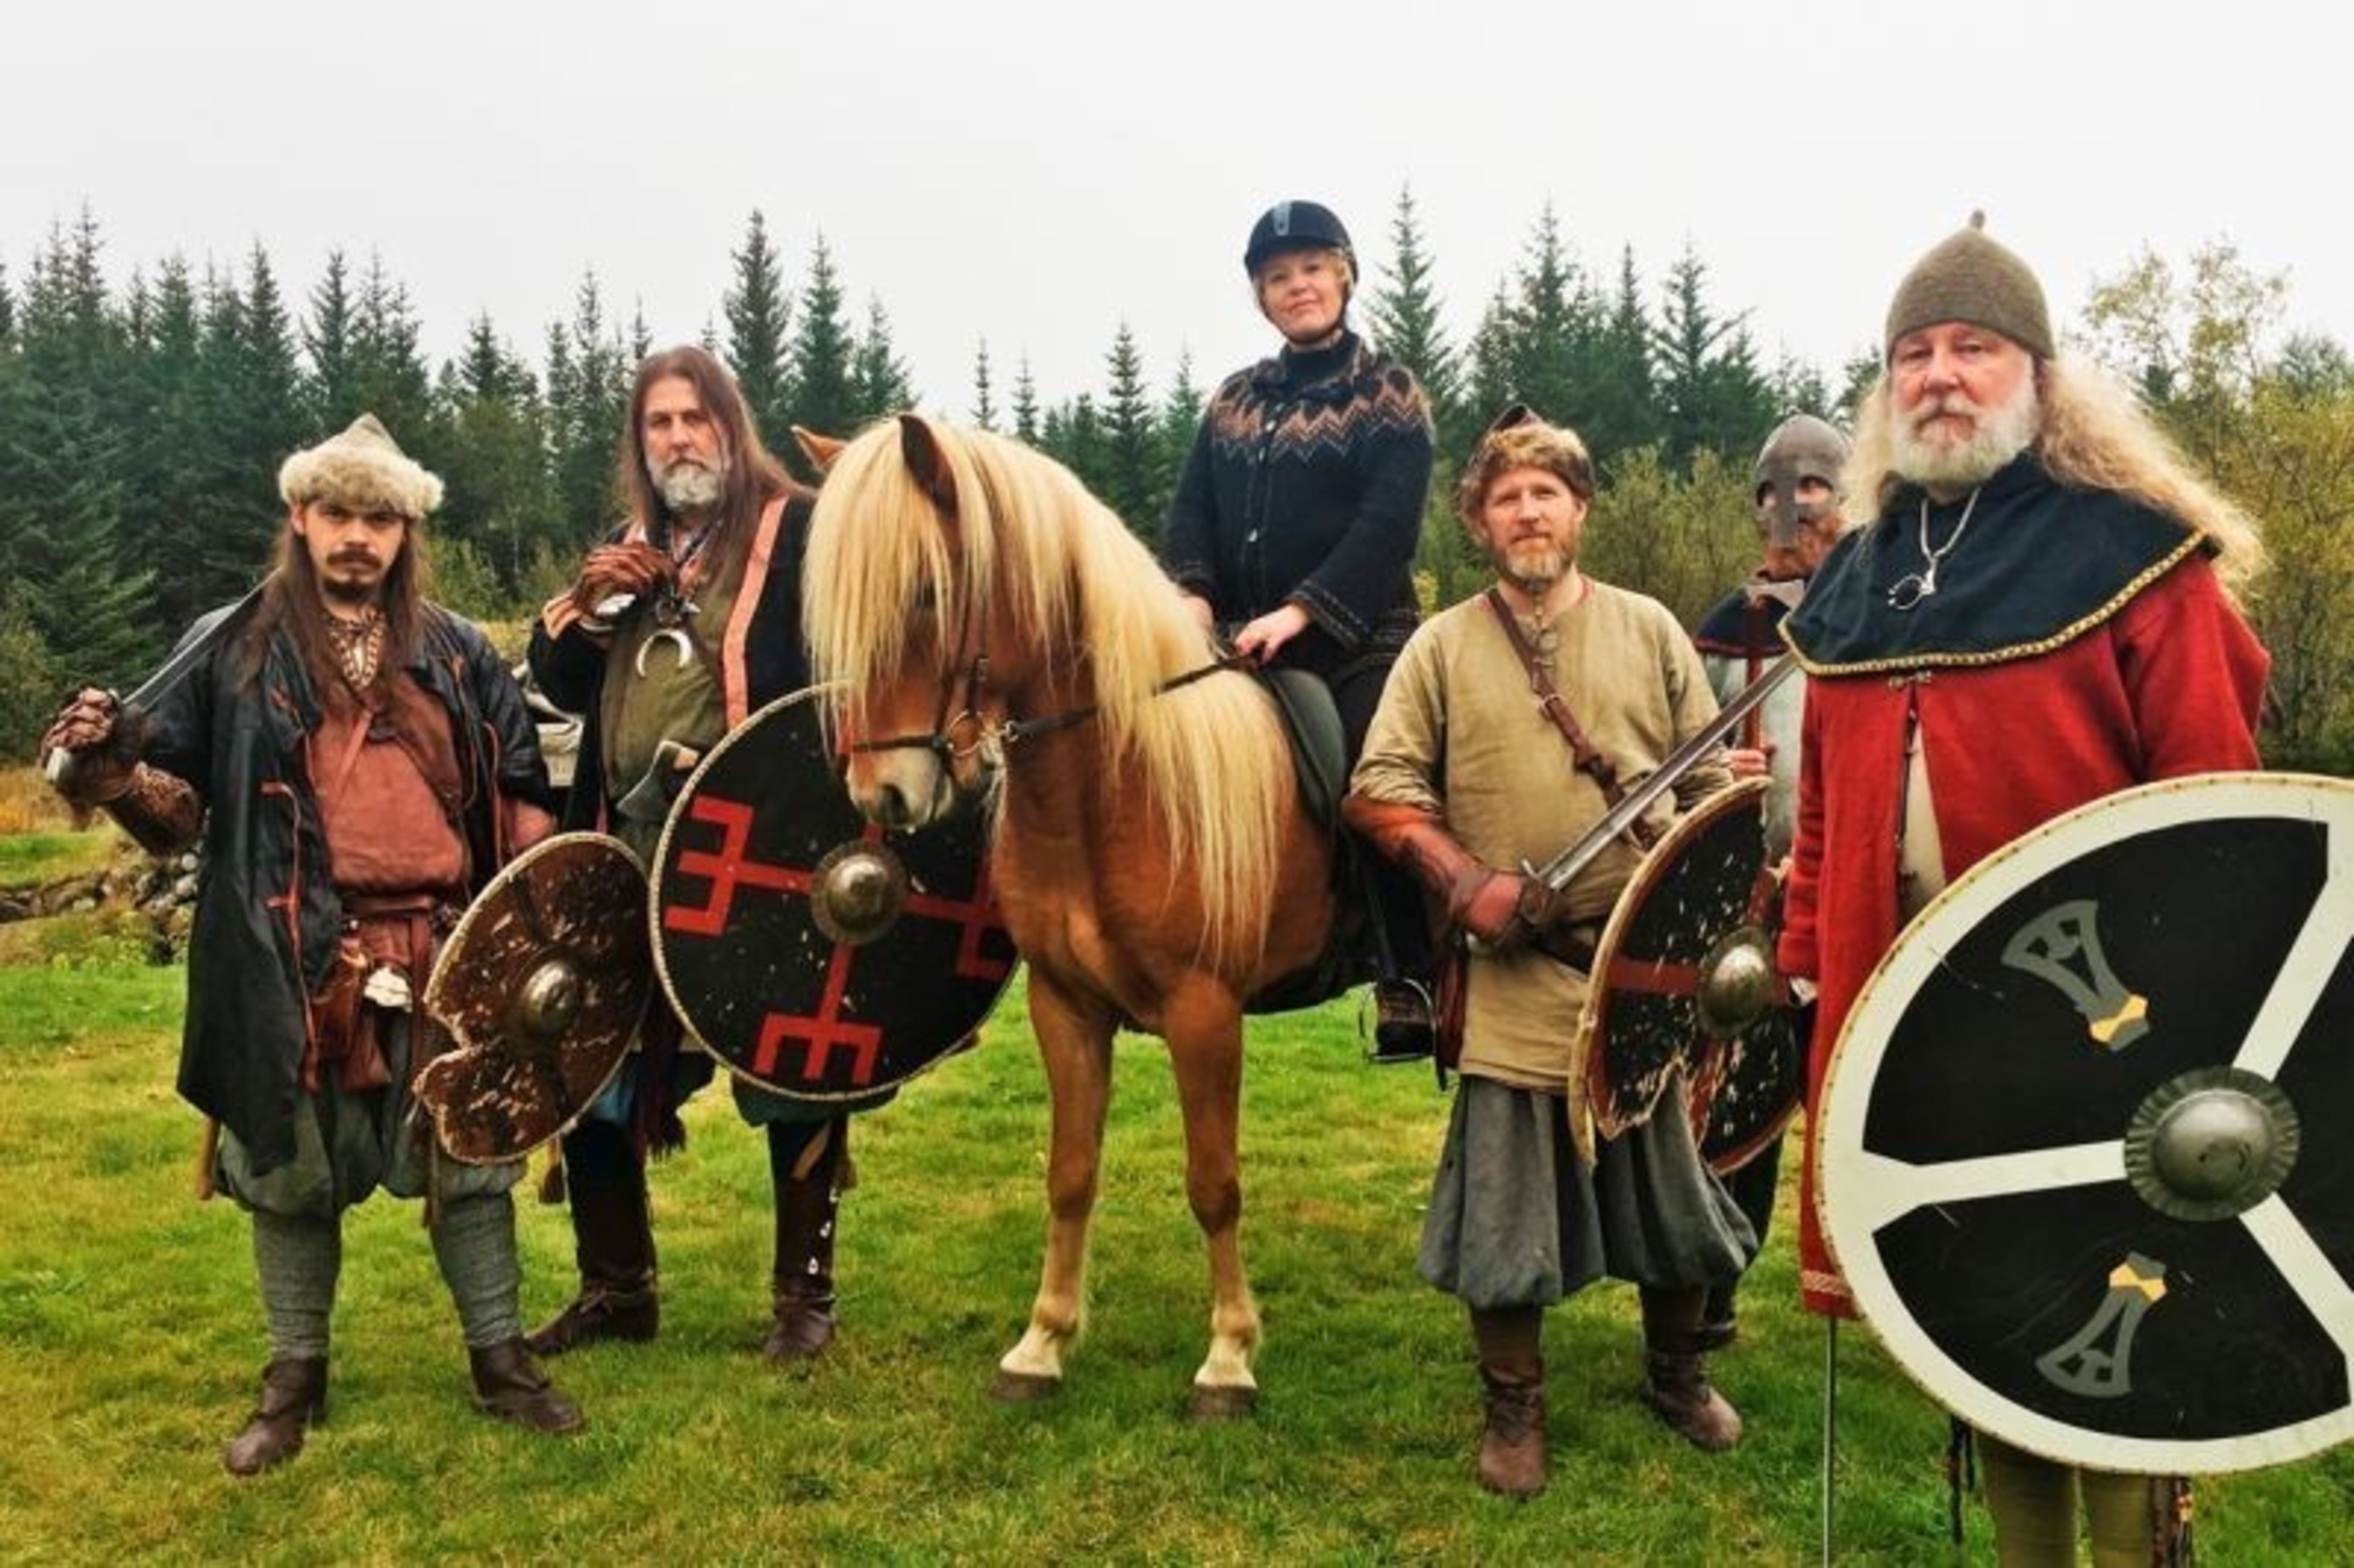 Inspired By Iceland launches new online video tutorial about Icelandic Sagas and horses as part of its Iceland Academy Winter timetable (PRNewsFoto/Inspired by Iceland)